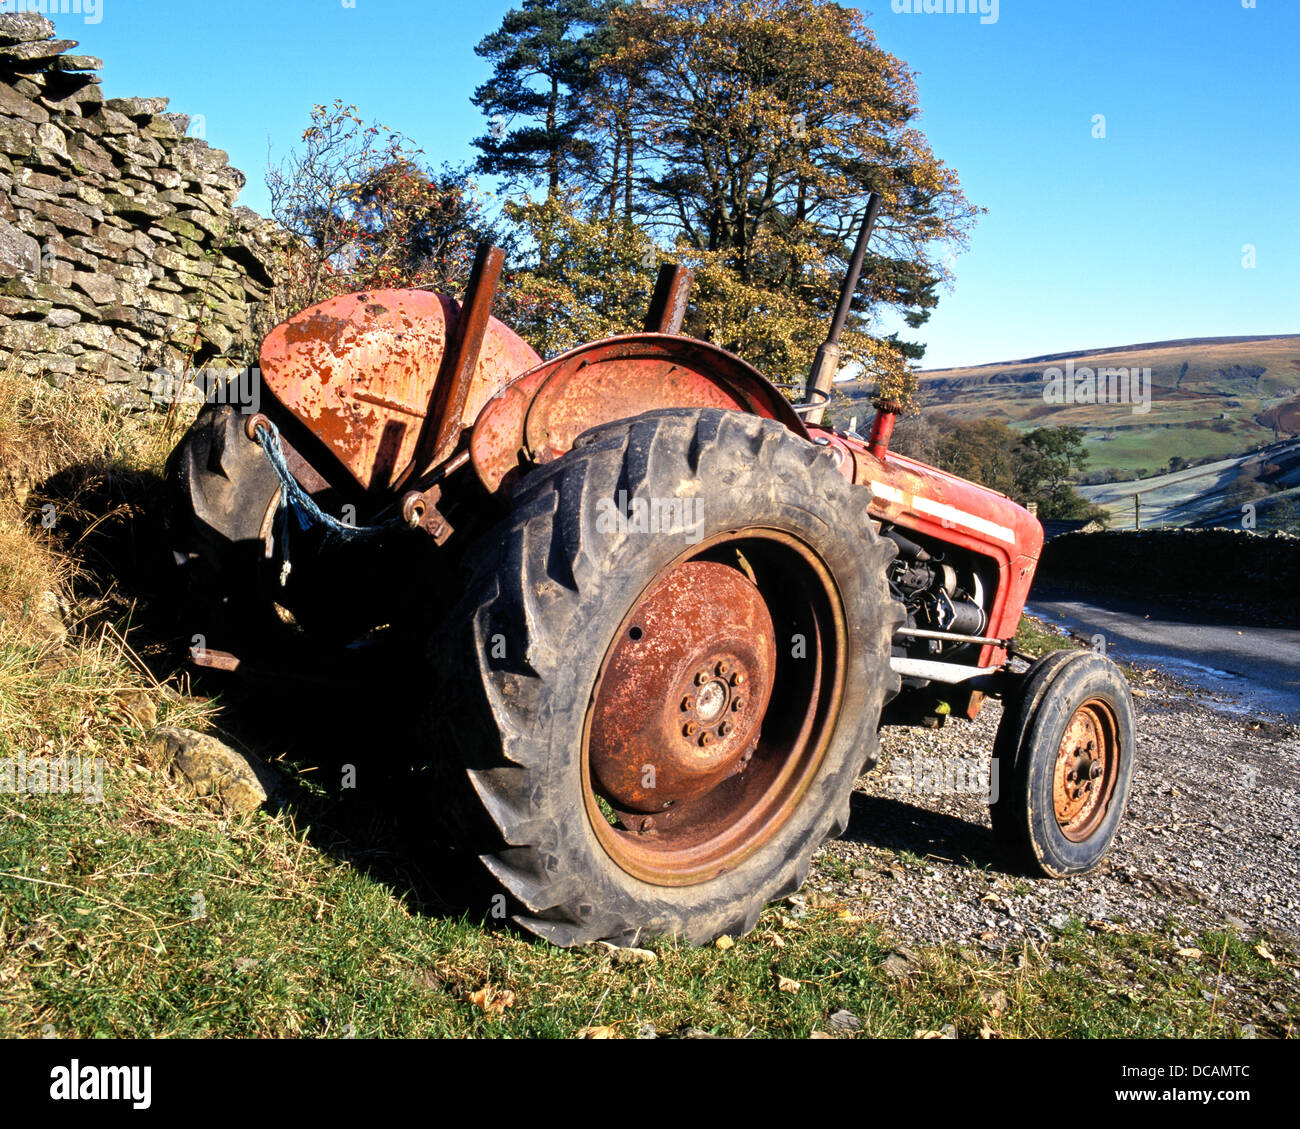 Tractor parked by a dry stone wall, Thwaite, Yorkshire Dales, North Yorkshire, England, UK, Great Britain, Western Europe. Stock Photo